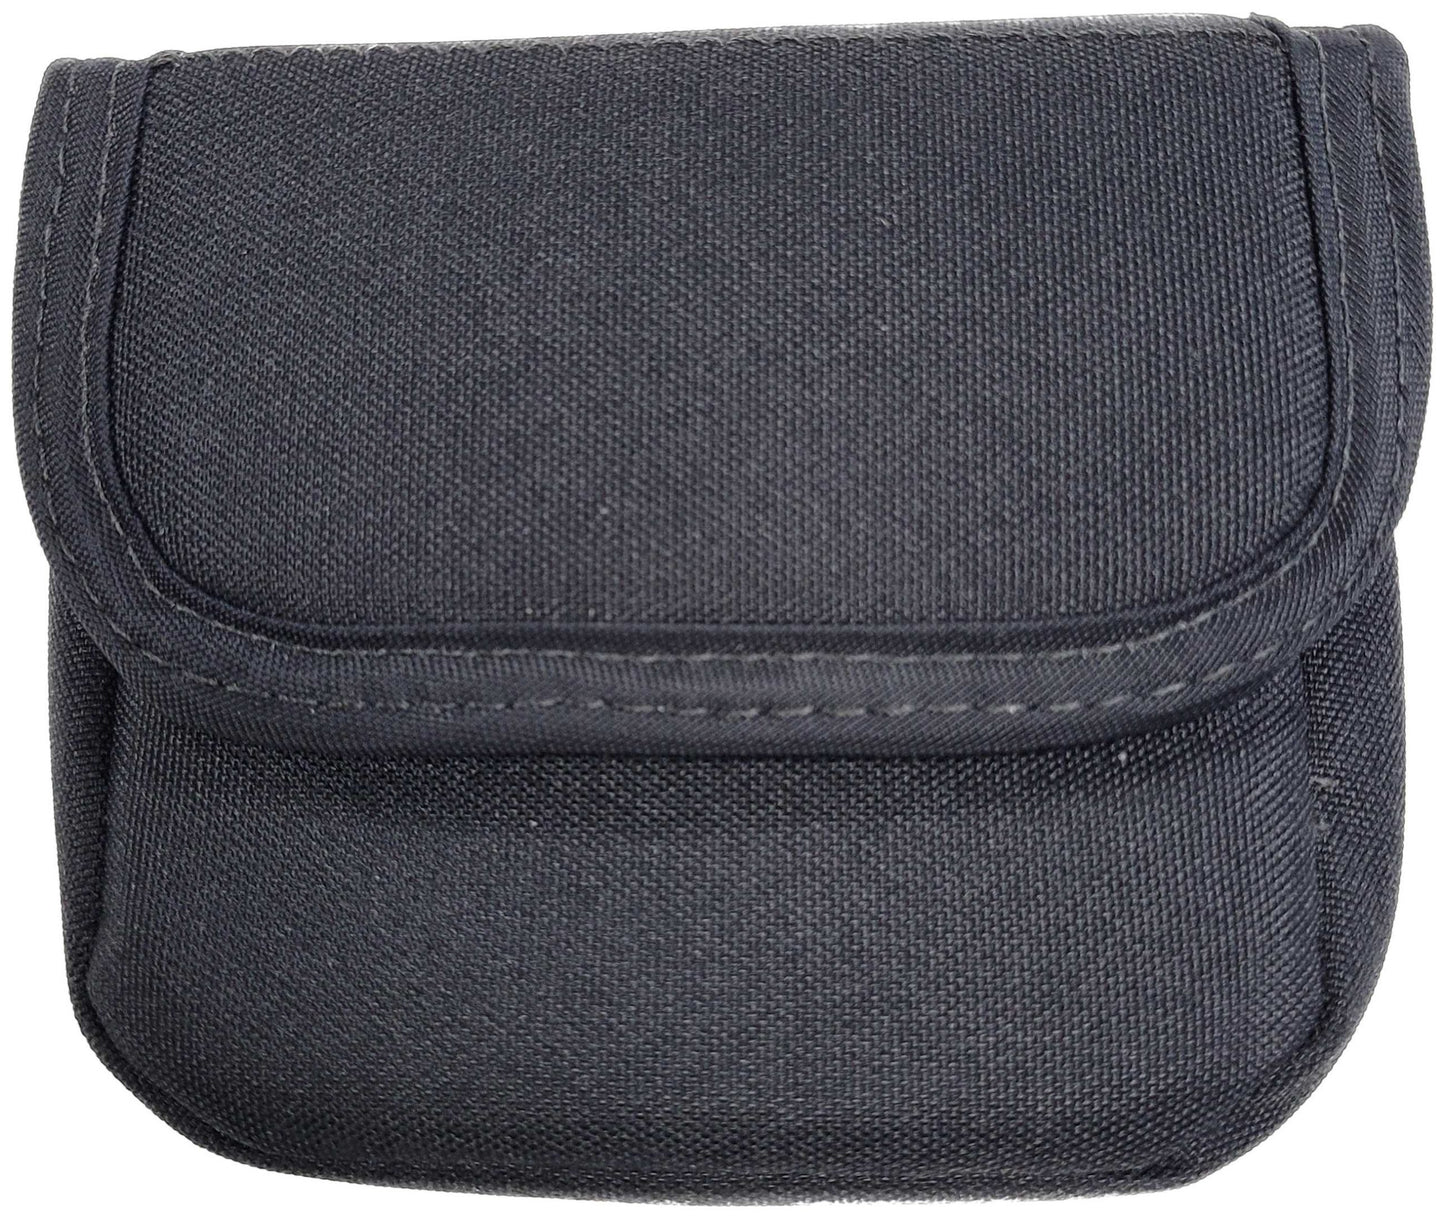 Padded Camera Case for Point & Shoot Camera's